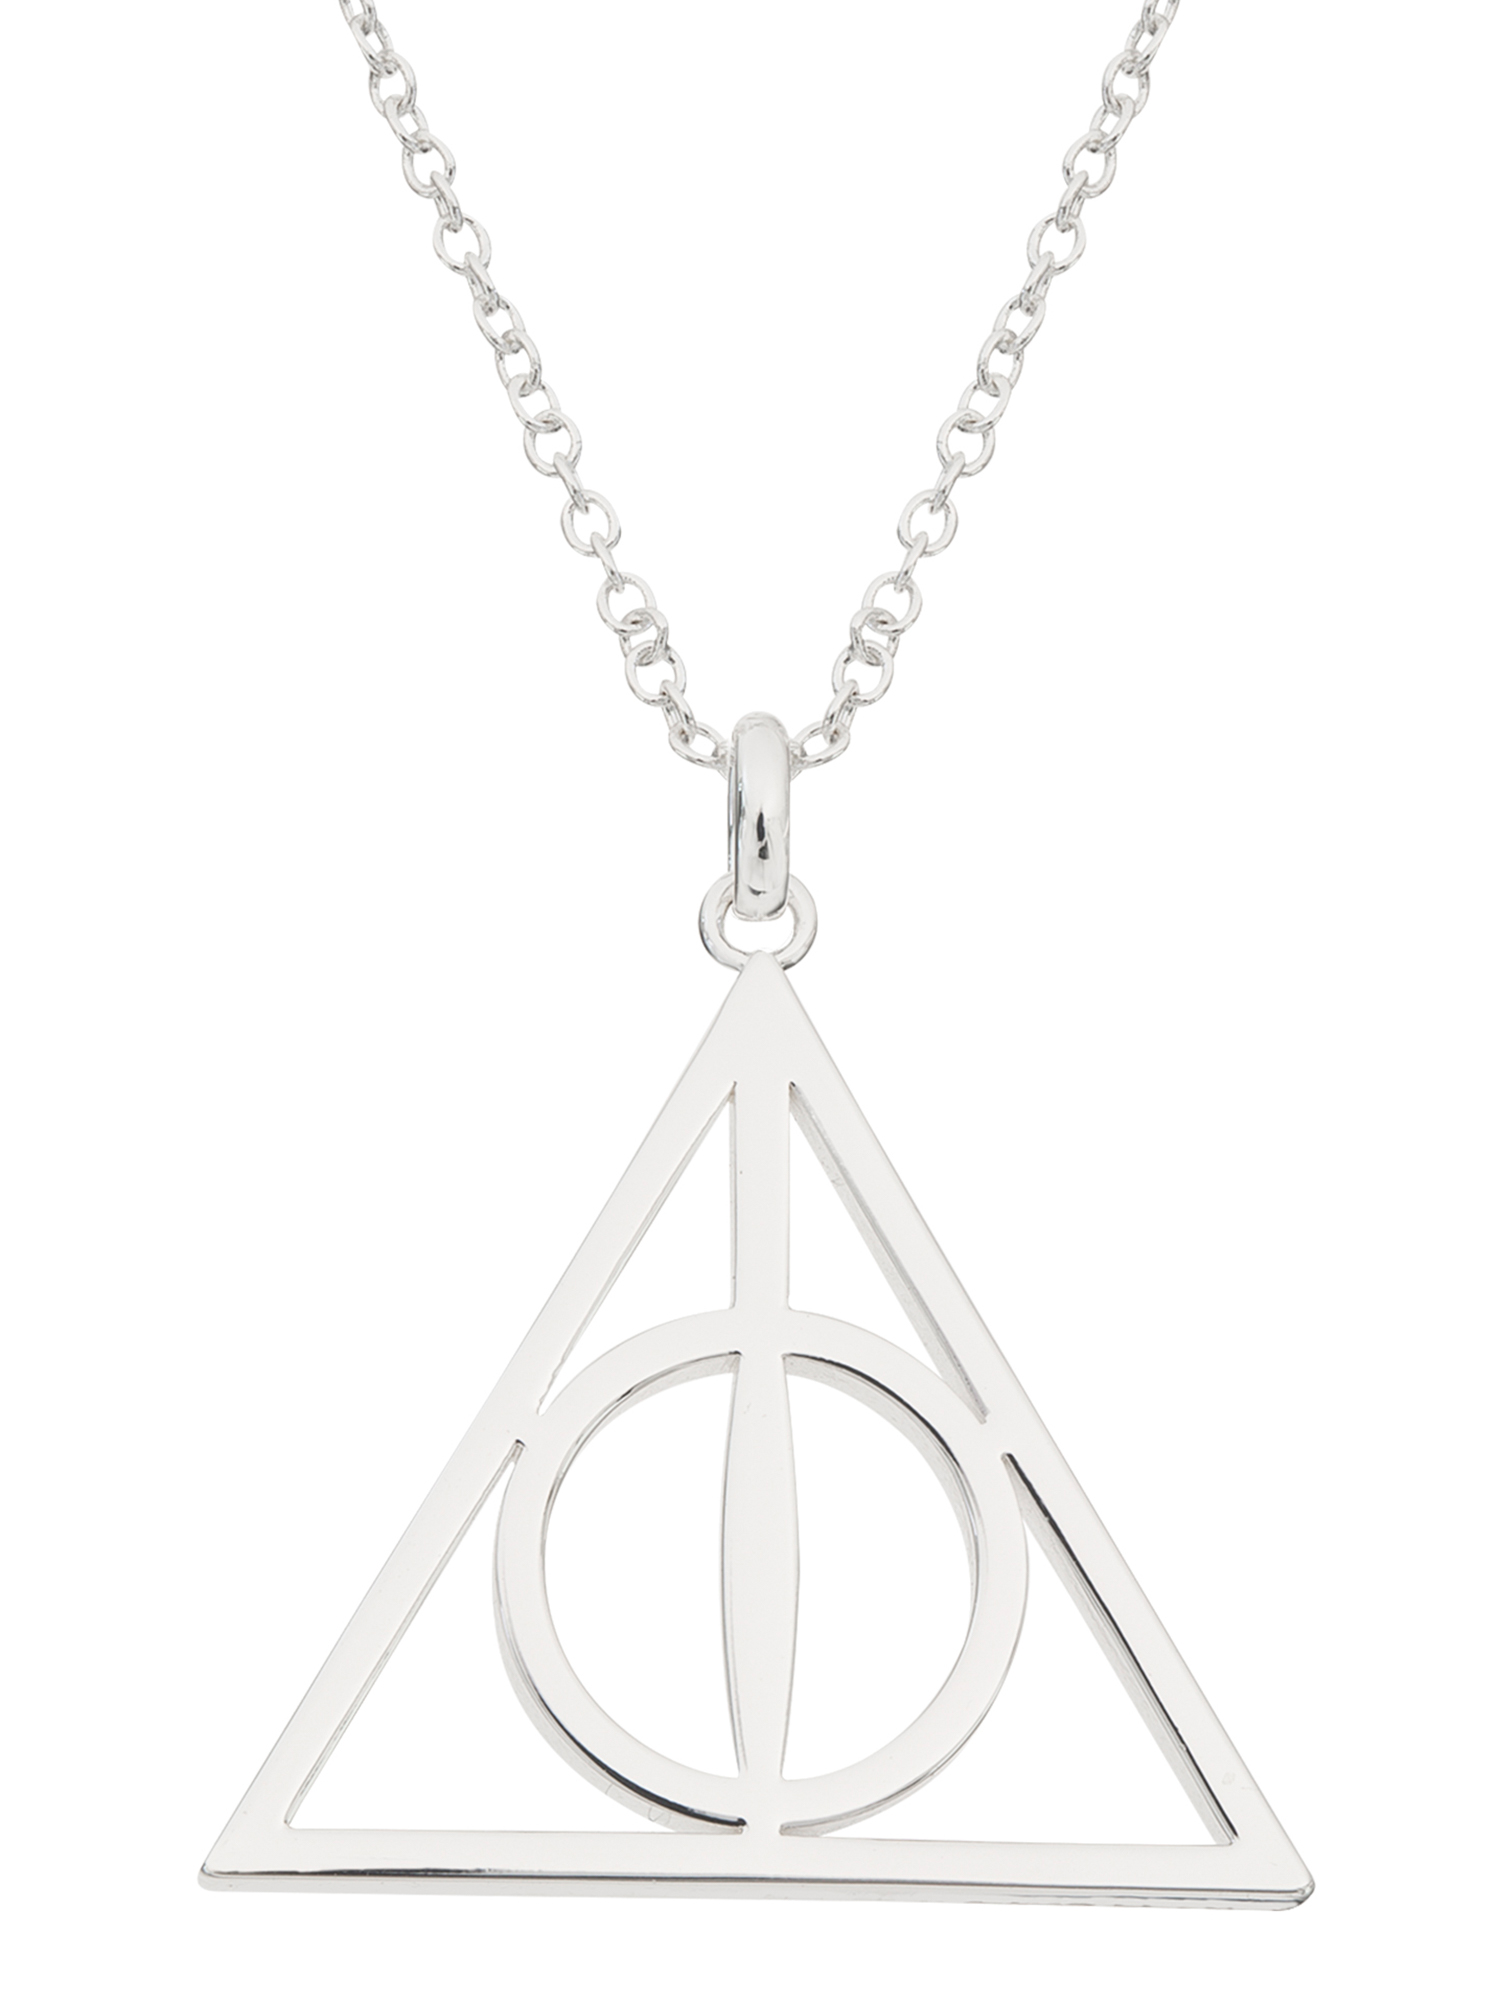 Harry Potter Deathly Hollow Silver Plated Brass Pendant, 18" - image 1 of 4